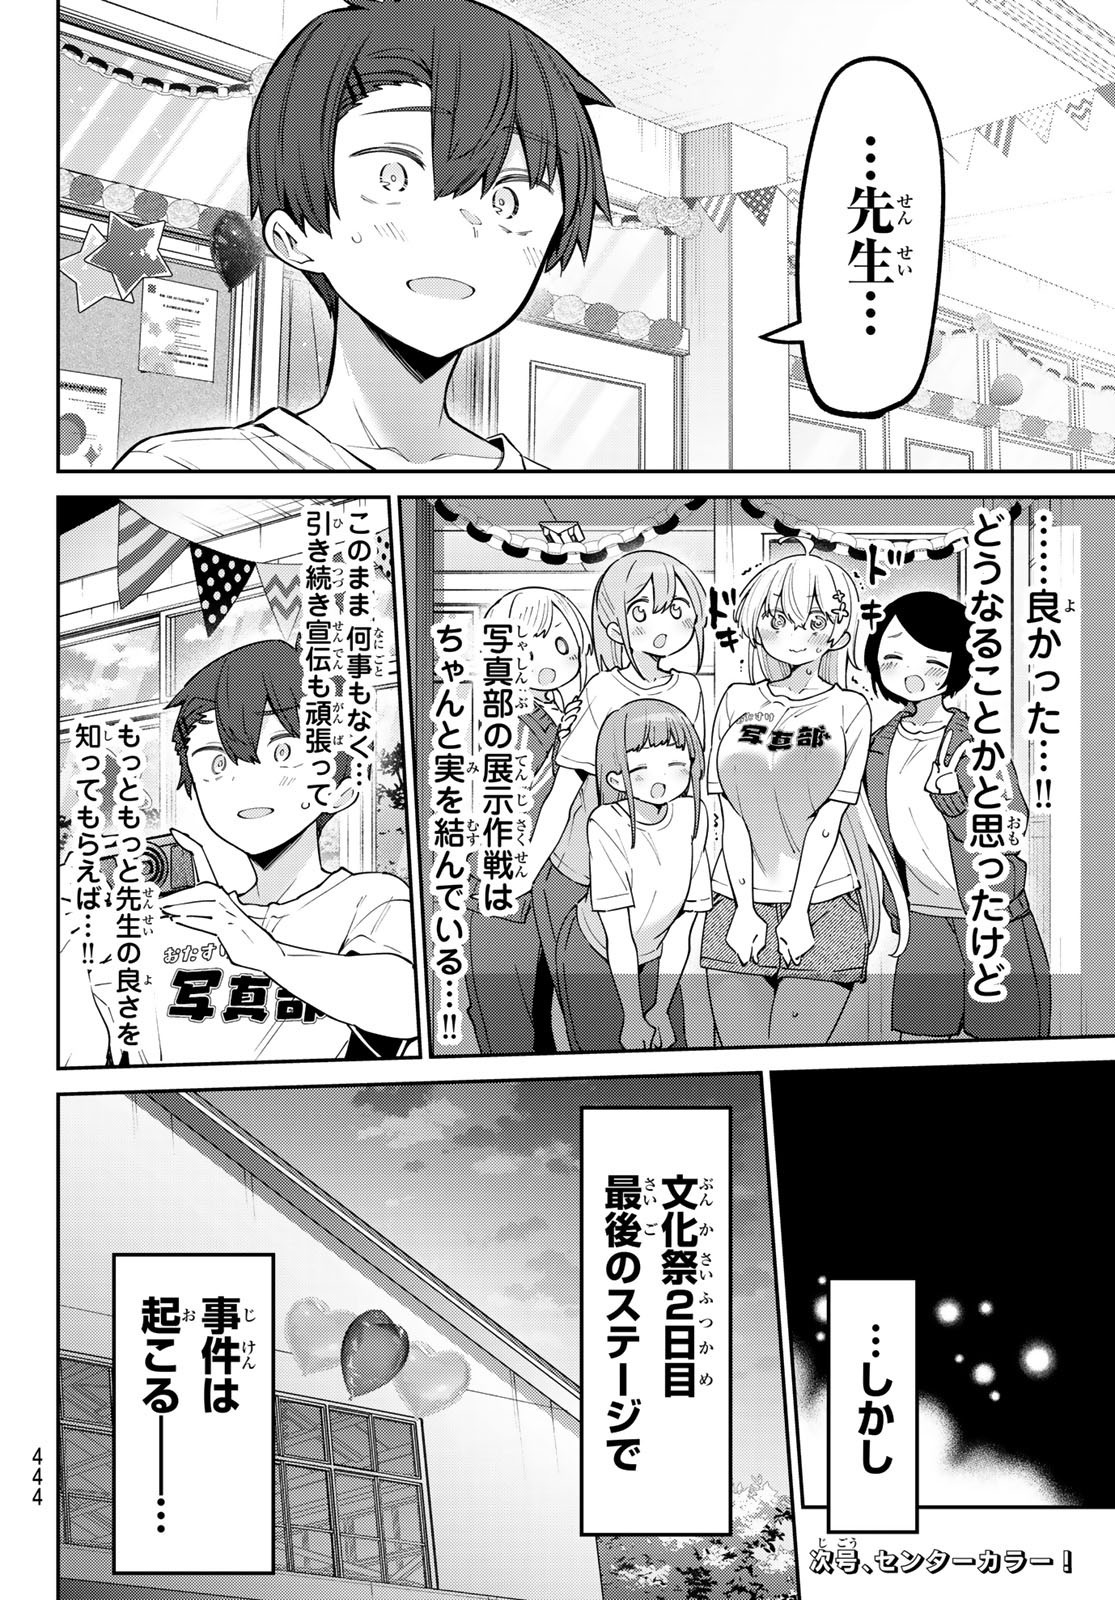 Weekly Shōnen Magazine - 週刊少年マガジン - Chapter 2024-33 - Page 442